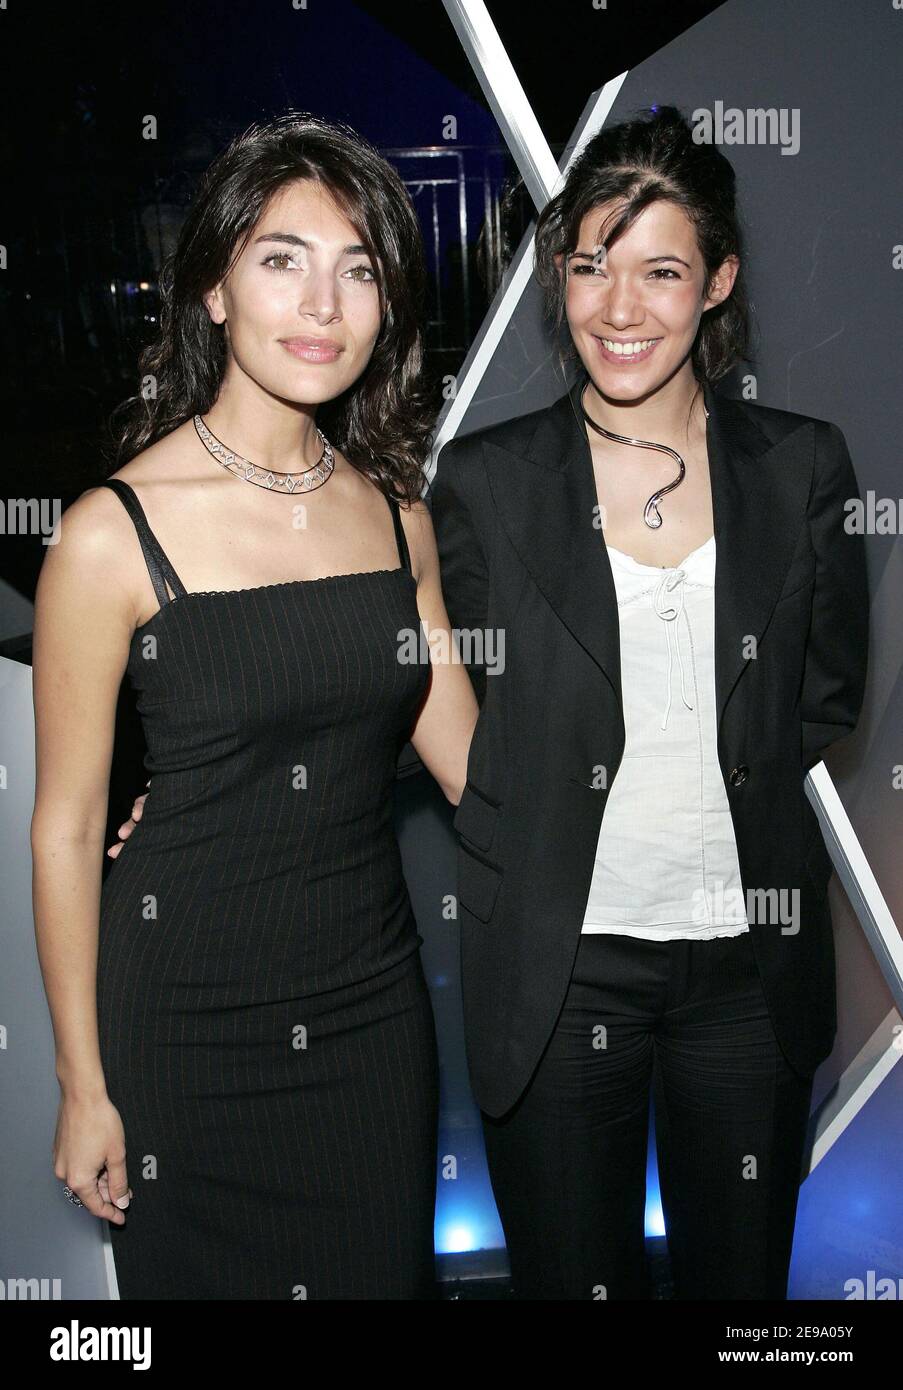 Italian actress Caterina Murino and French actress Melanie Doutey attend  the 'Diamant du Coeur' launch party